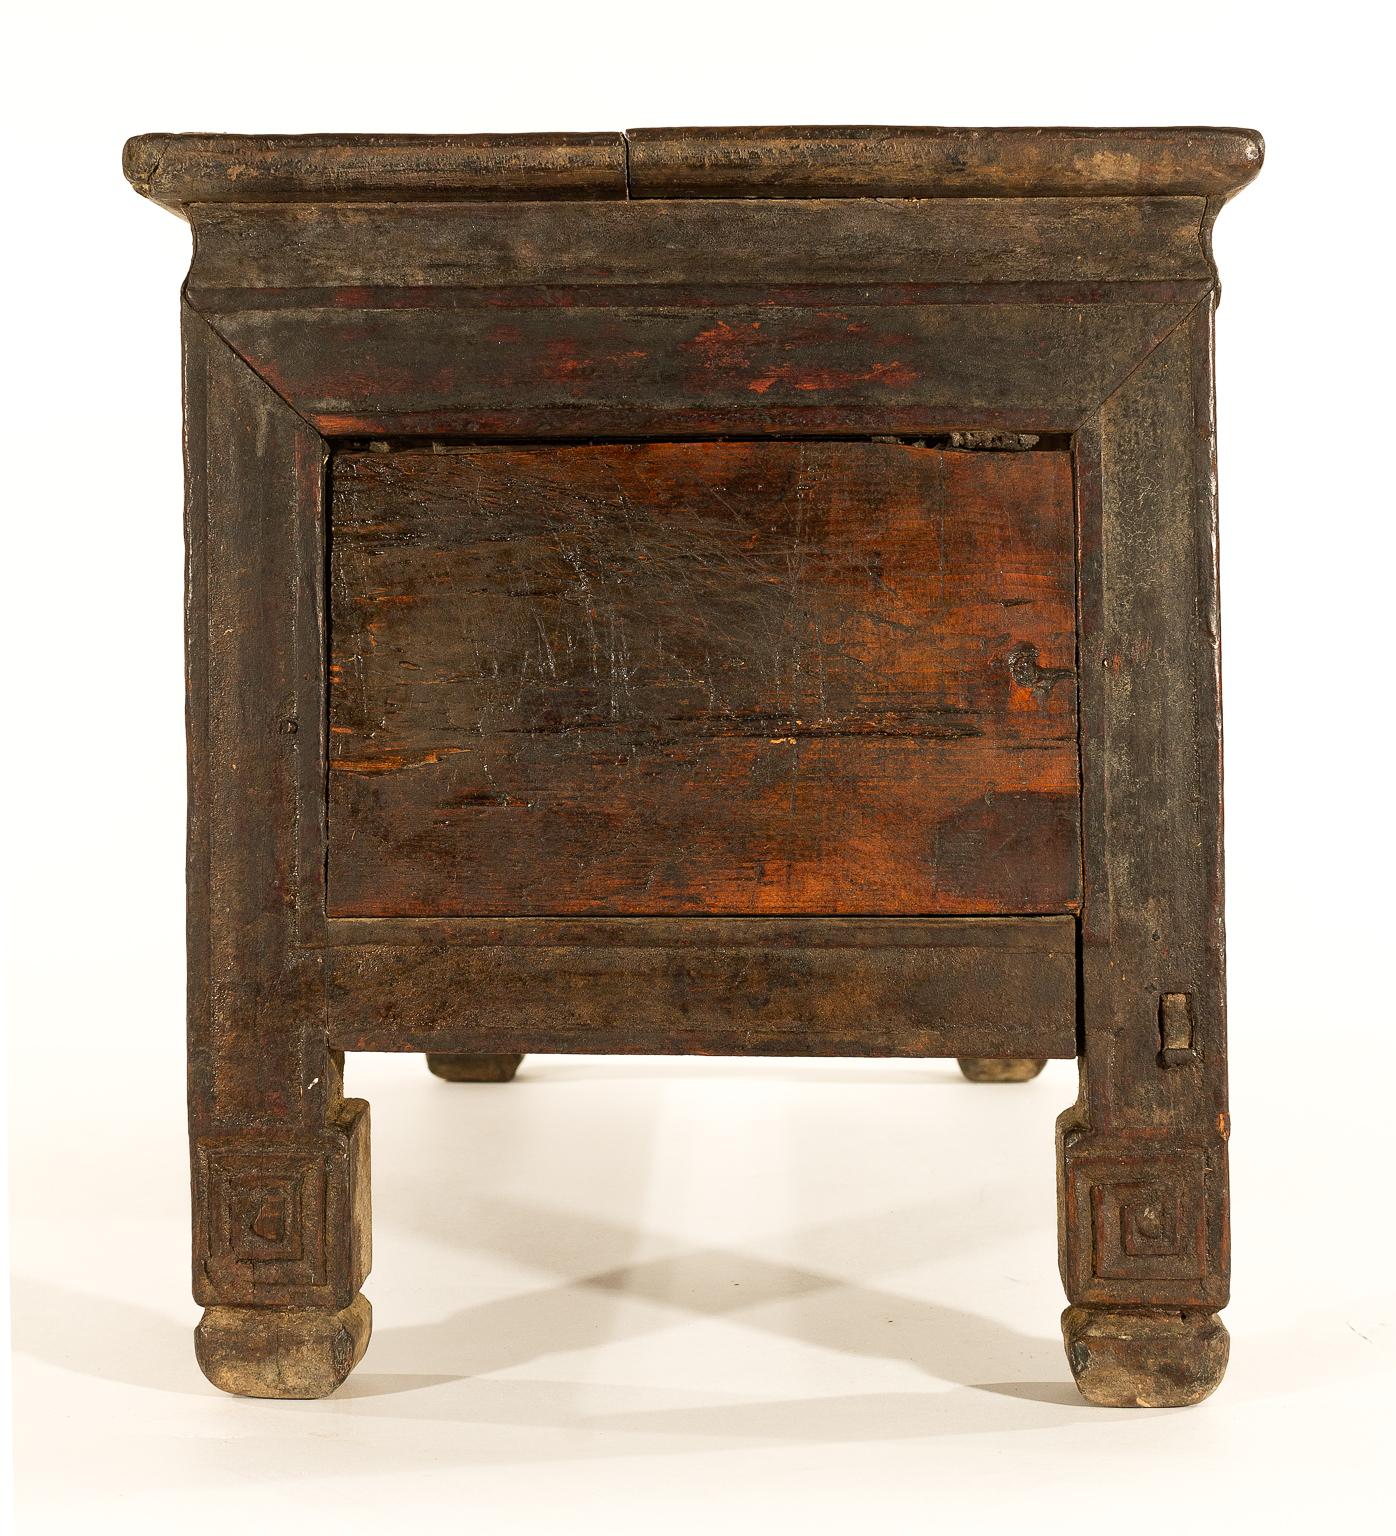 Hand-Crafted Antique Tibetan Tea Table or Storage Box For Sale